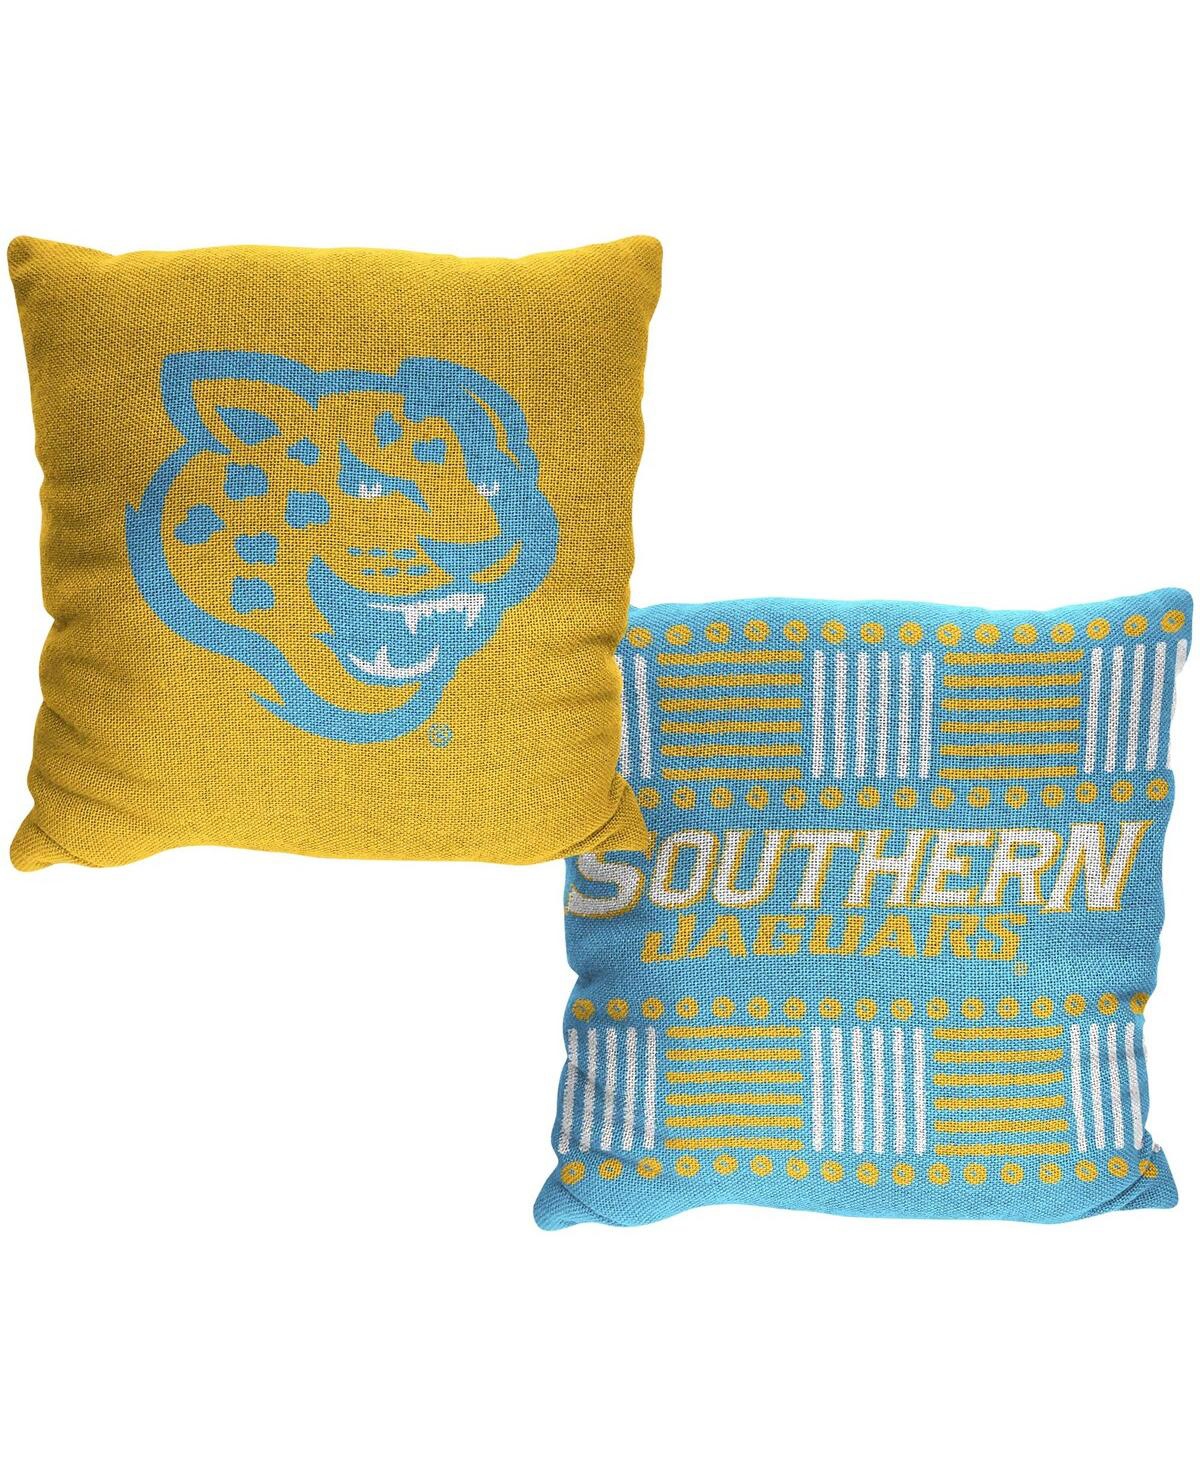 Northwest Company The  Southern University Jaguars Homage Double-sided Pillow In Yellow,blue